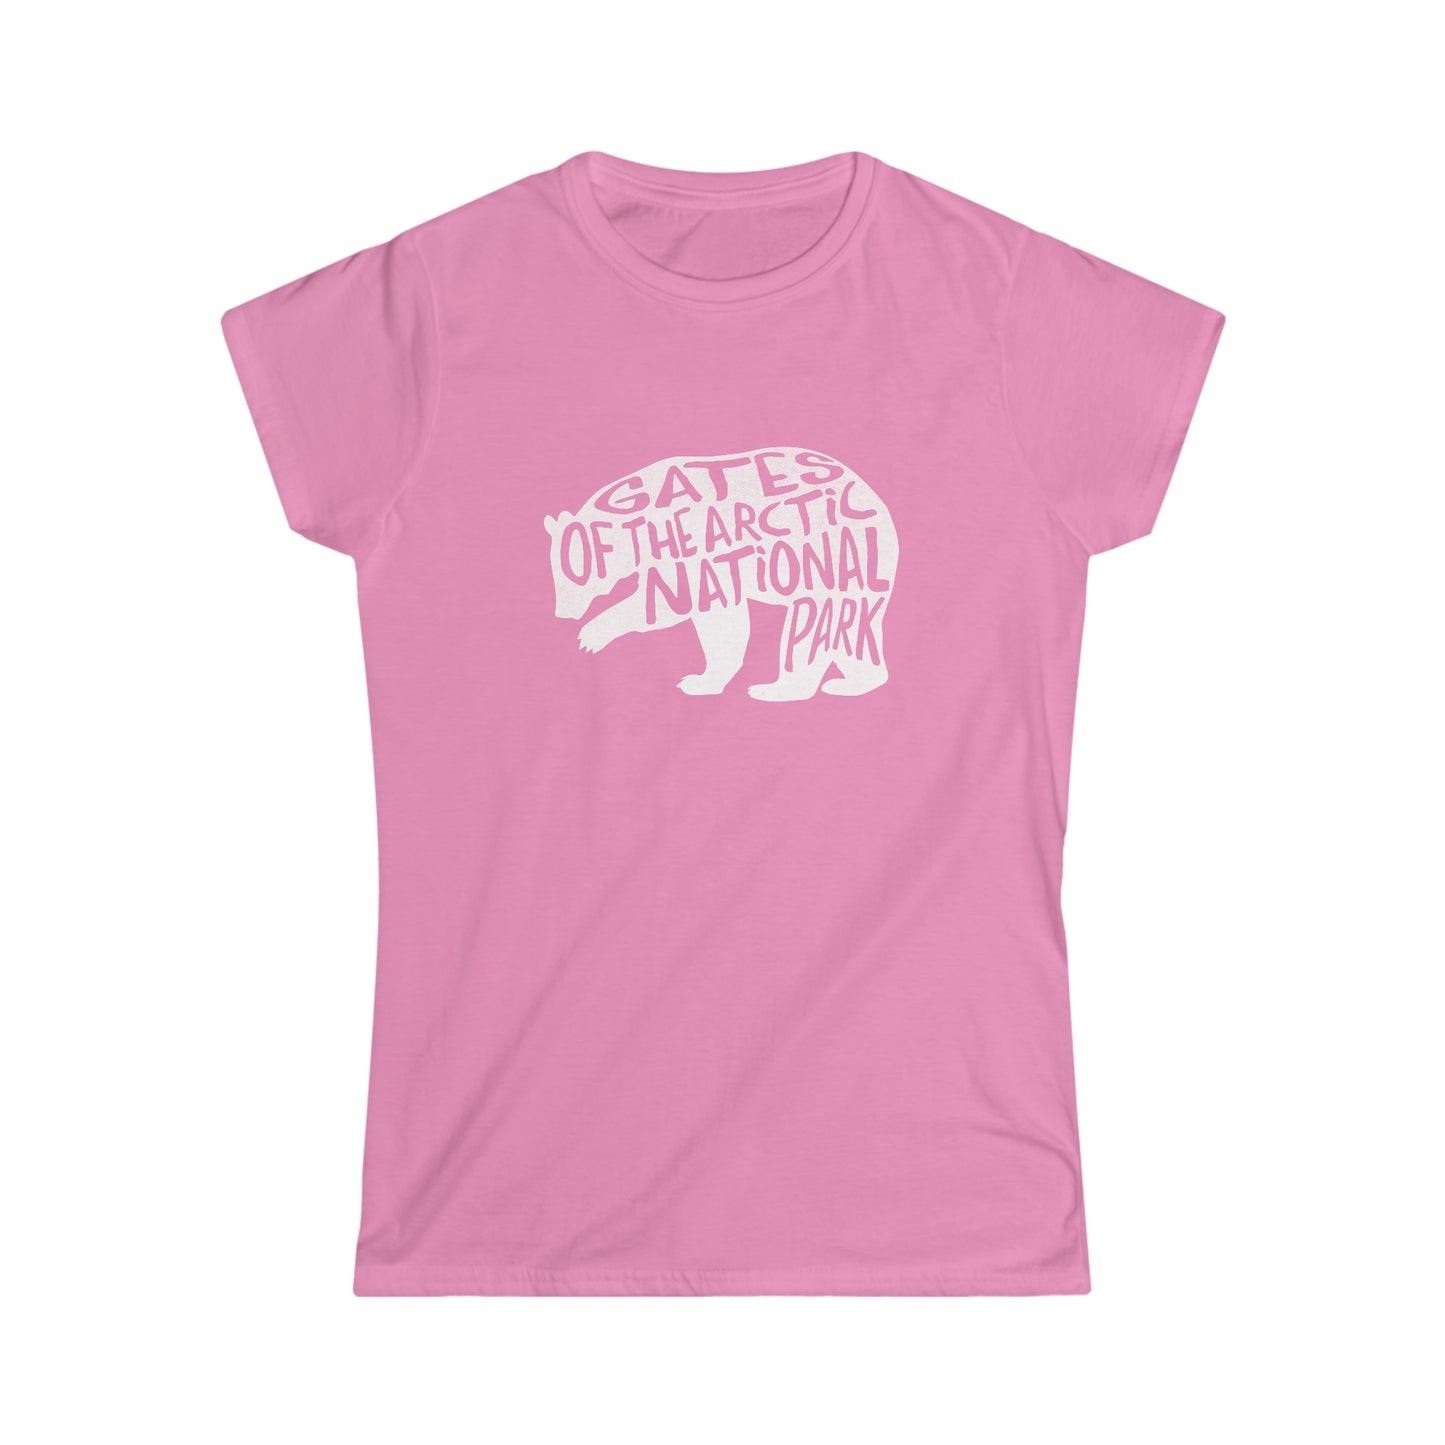 Gates of the Arctic National Park Women's T-Shirt - Grizzly Bear